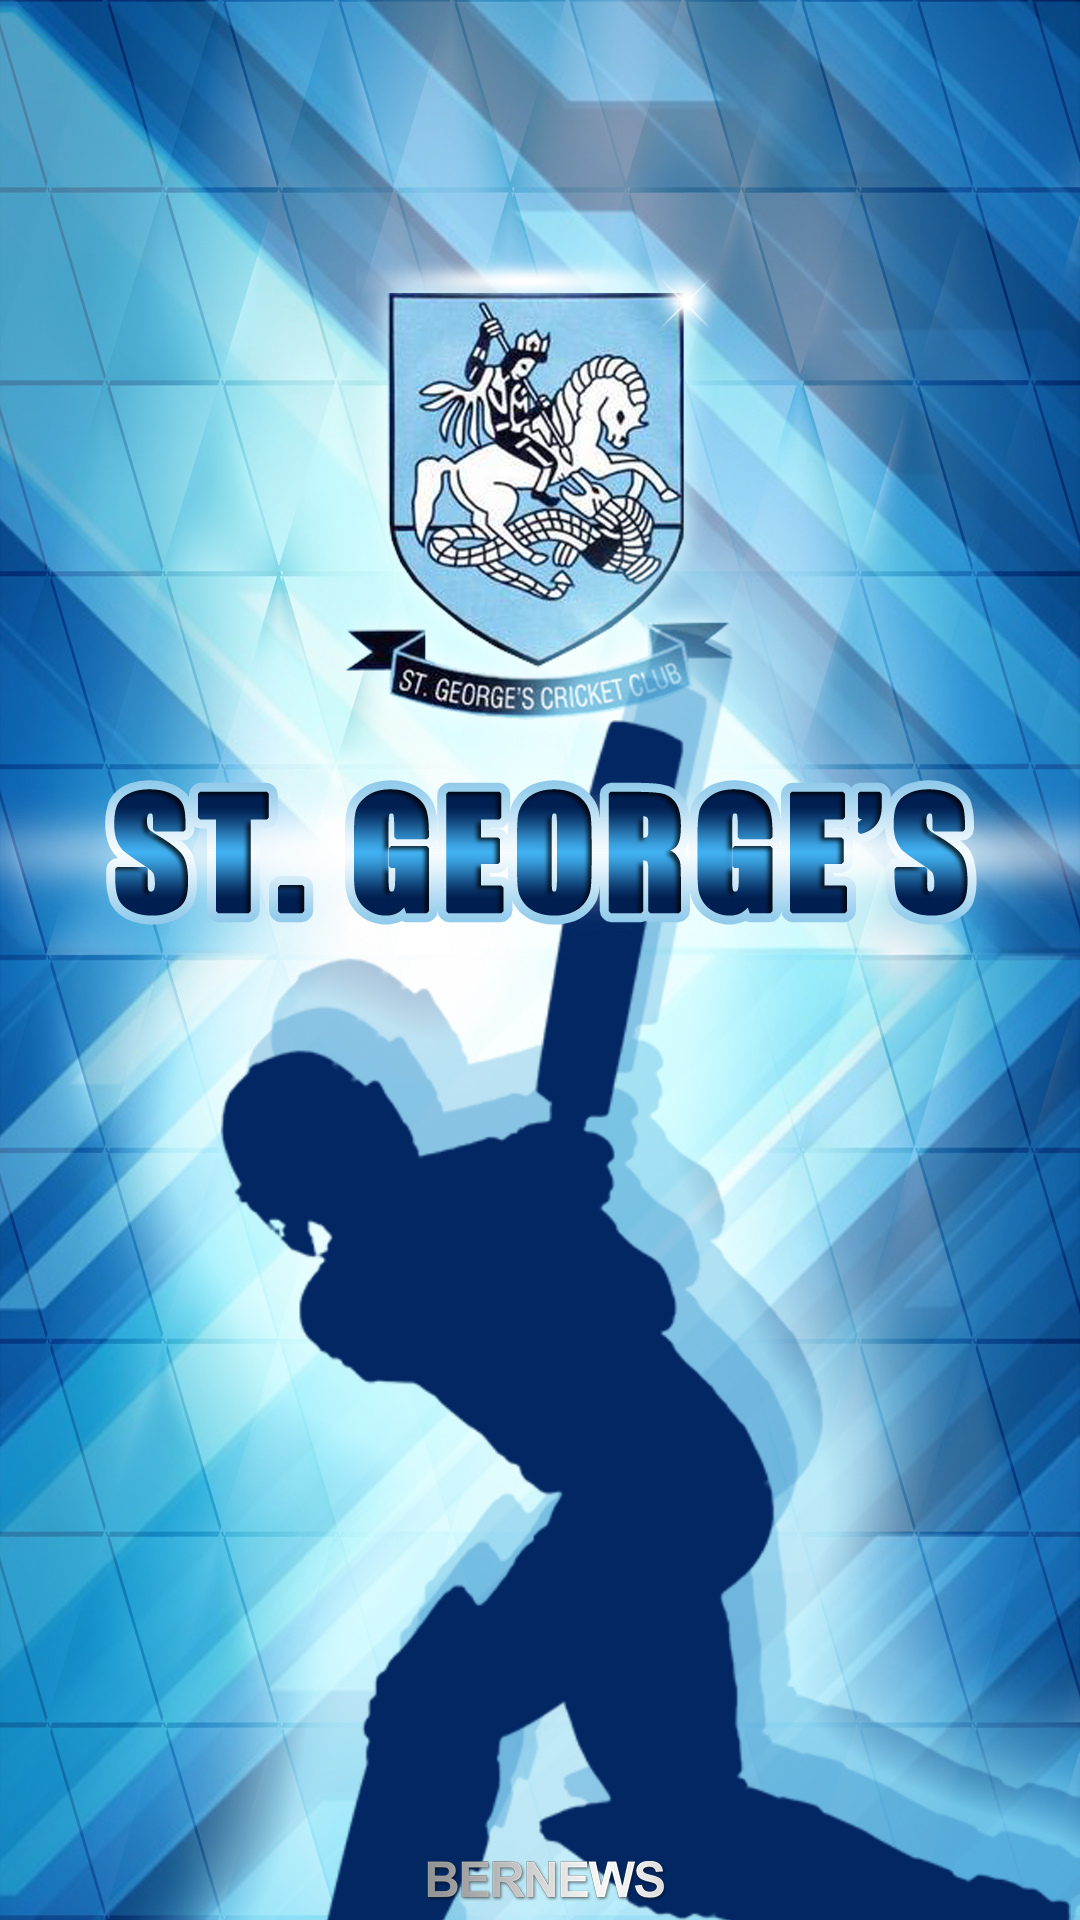 St Georges Cup Match Bermuda Phone Wallpaper by Bernews 2018 (6)